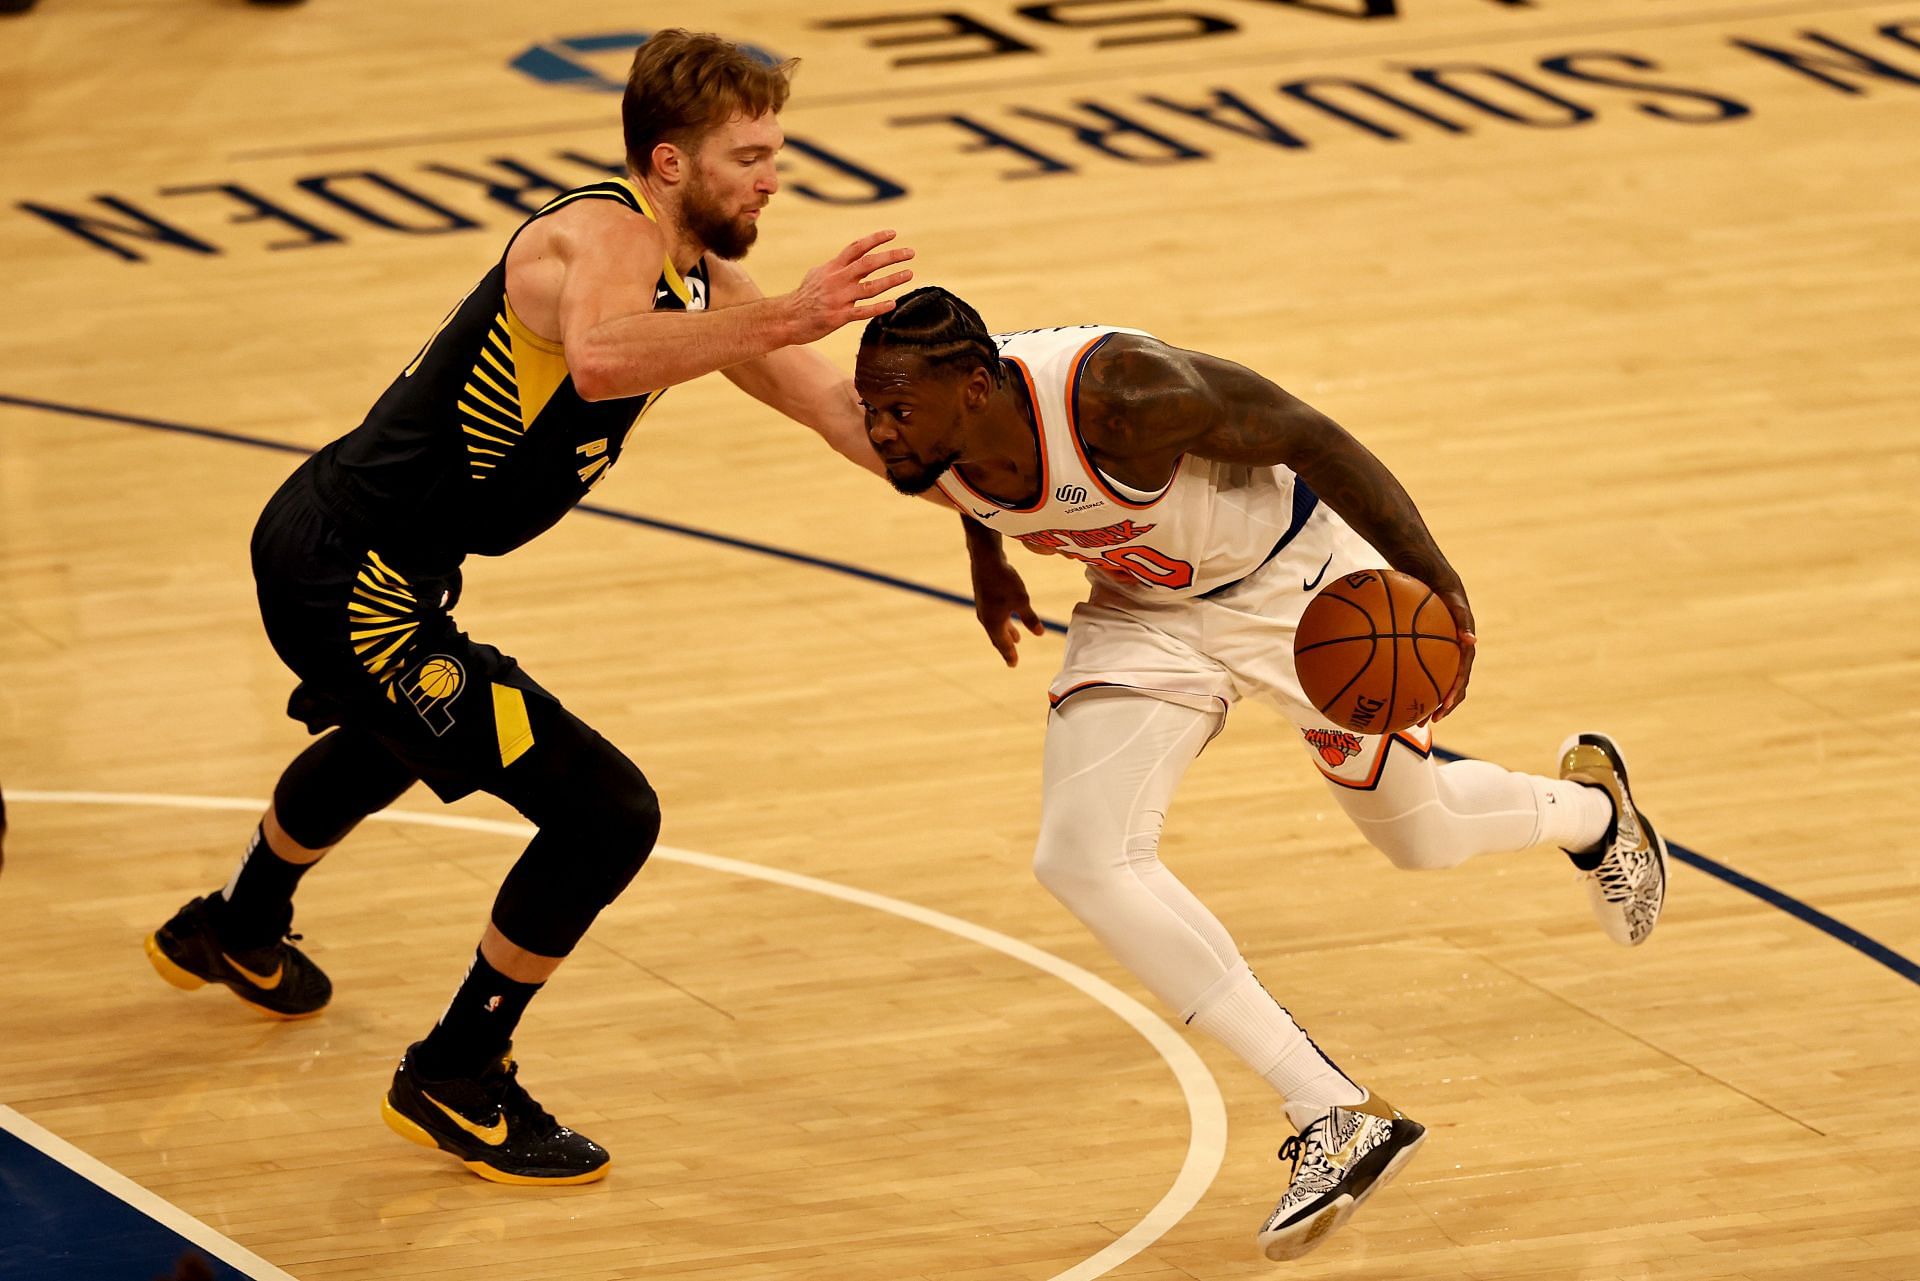 Indiana Pacers will take on the New York Knicks on Monday.